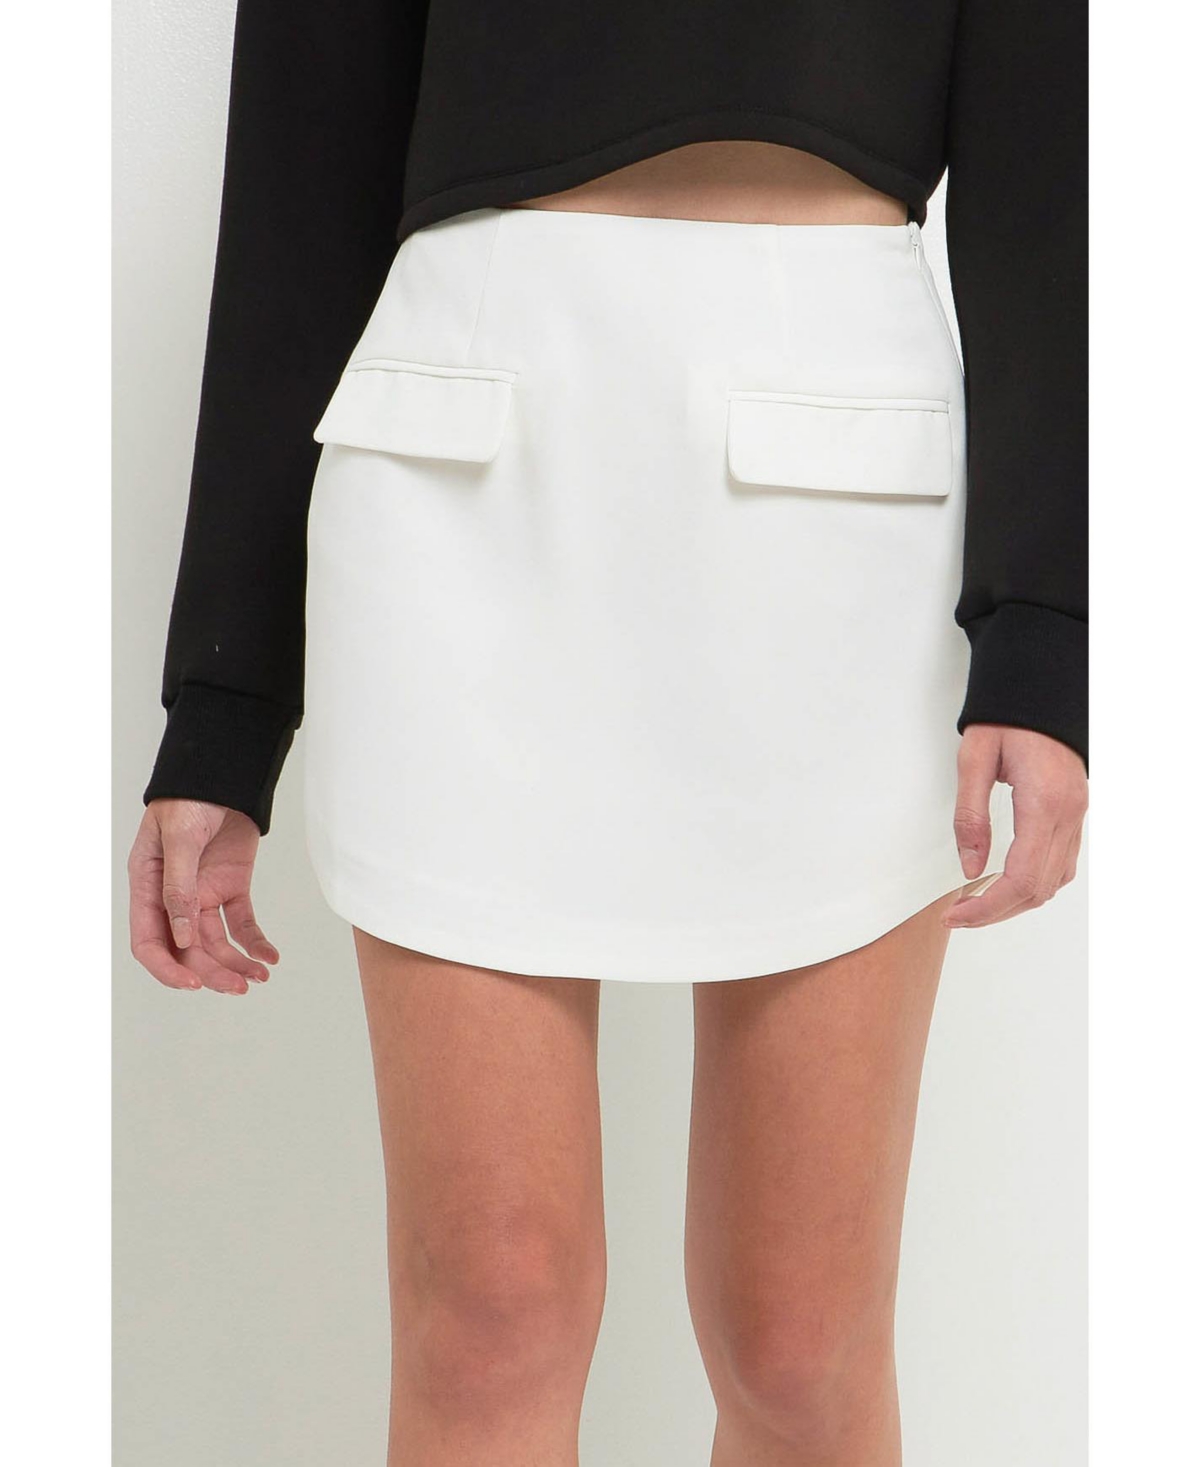 Grey Lab Women's Curved Opening Mini Skirt